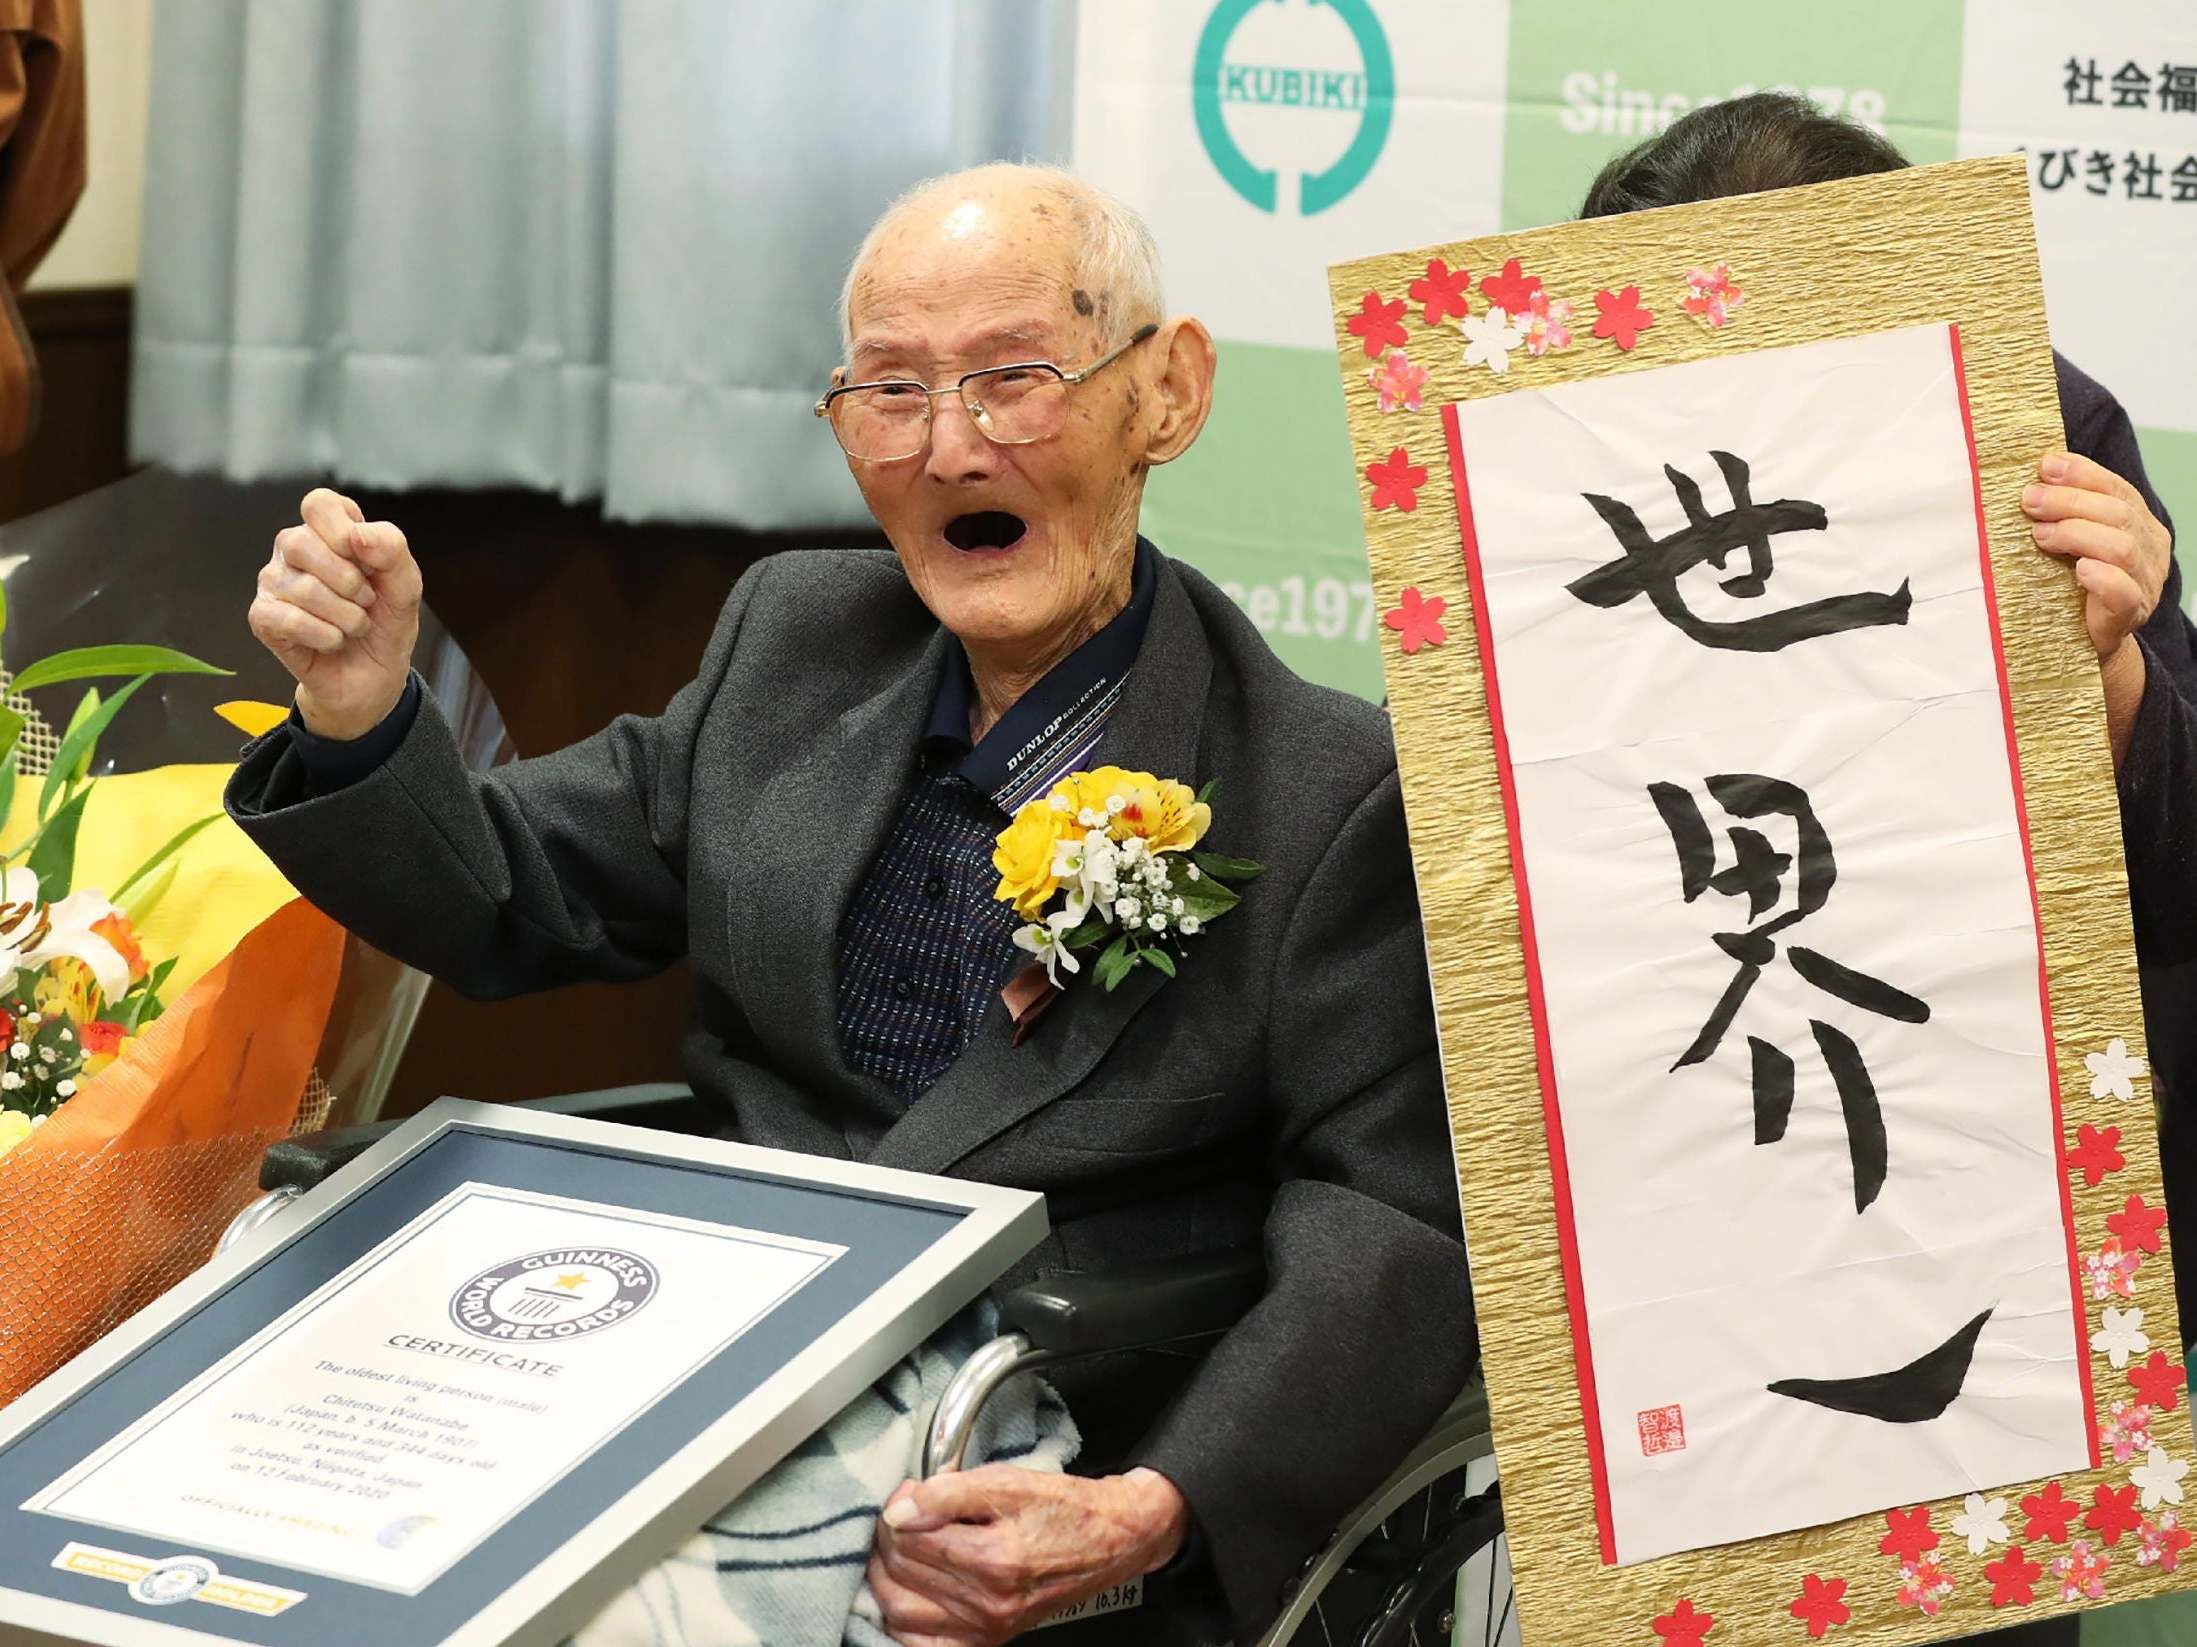 112-year-old Japanese man Chitetsu Watanabe poses next to the calligraphy he wrote after being recorded as the world's oldest living male by Guinness World Records, in Joetsu, Niigata prefecture, northern Japan, 12 February, 2020.